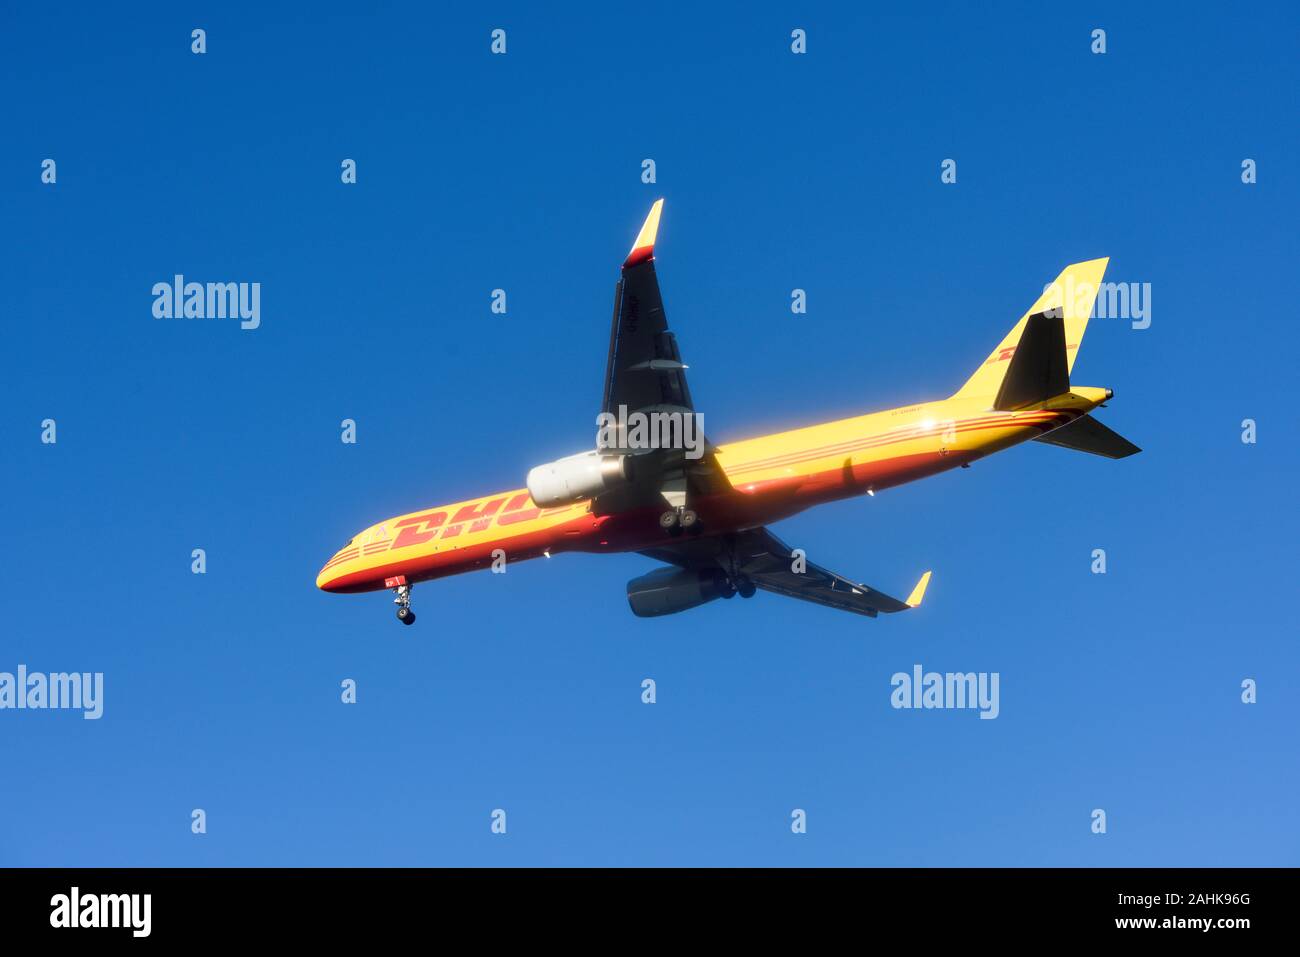 DHL Cargo Aircraft on approach to East Midlands Airport preparing to Land, UK. Stock Photo